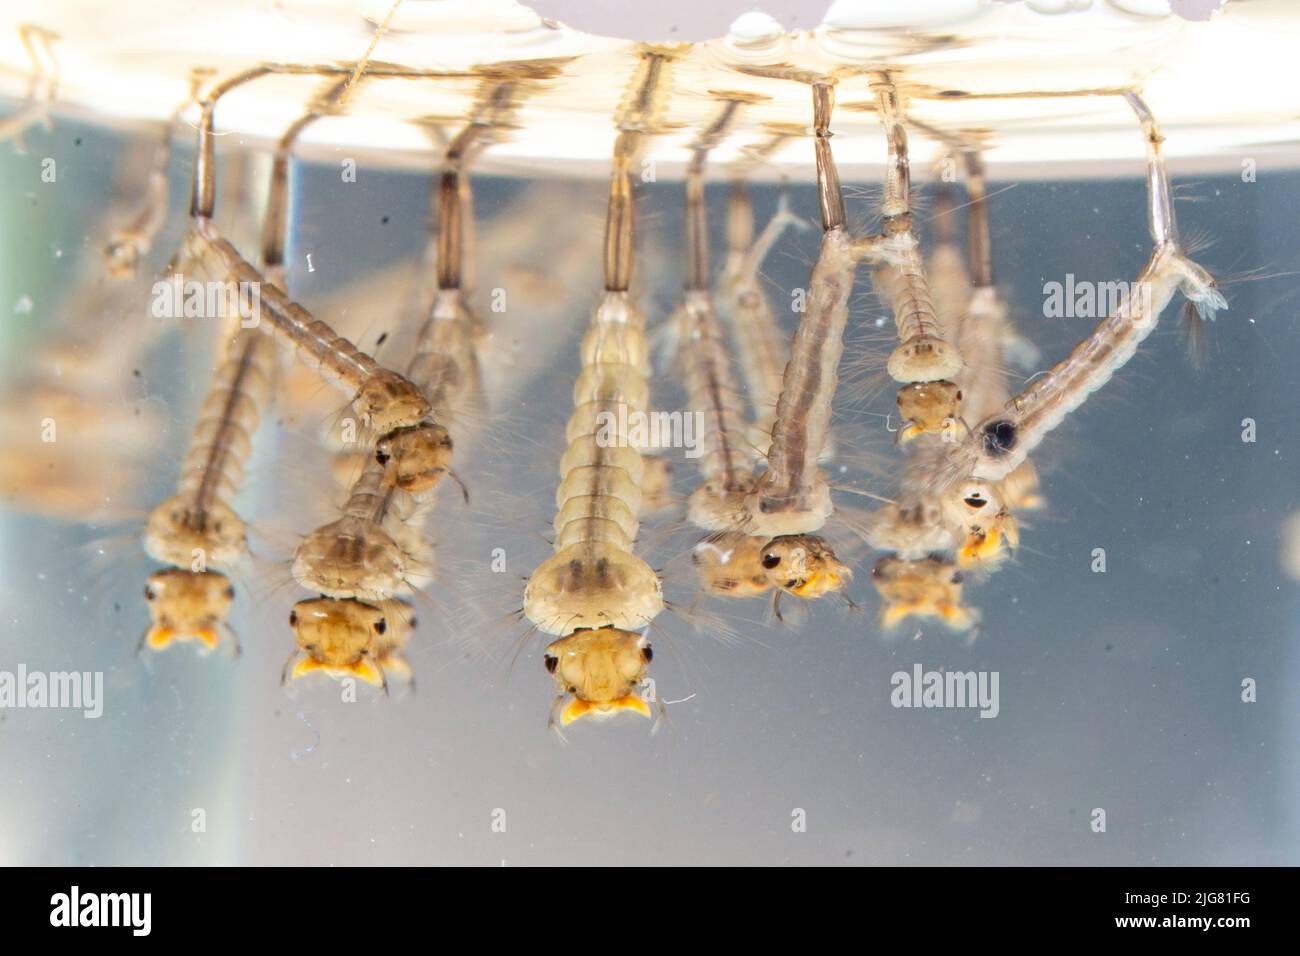 Common house mosquito larvae in water alive, Culex pipiens in Europe. Close-up photo Stock Photo